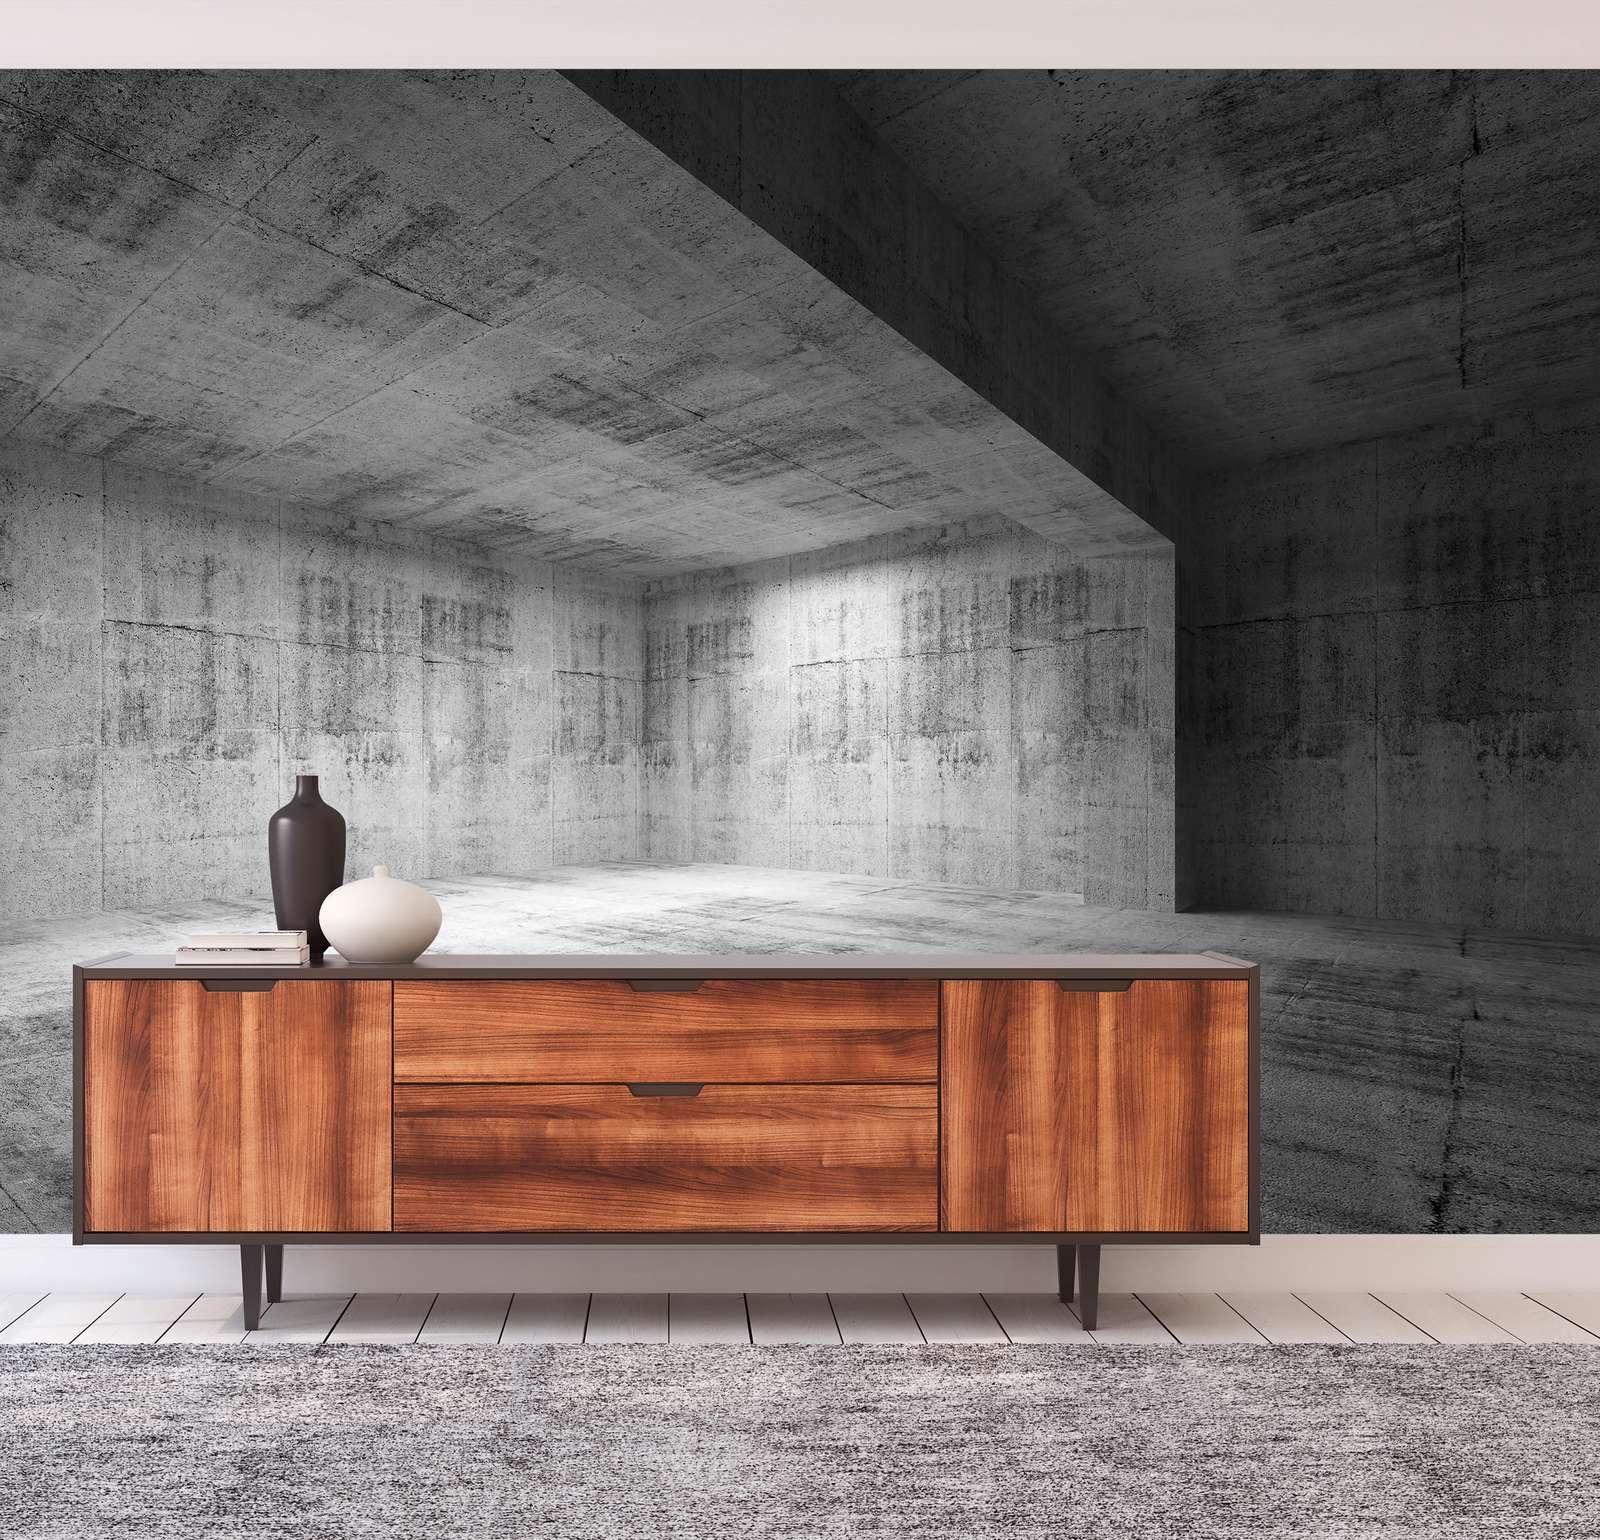             Concrete Room Wallpaper with 3D Effect - Grey
        